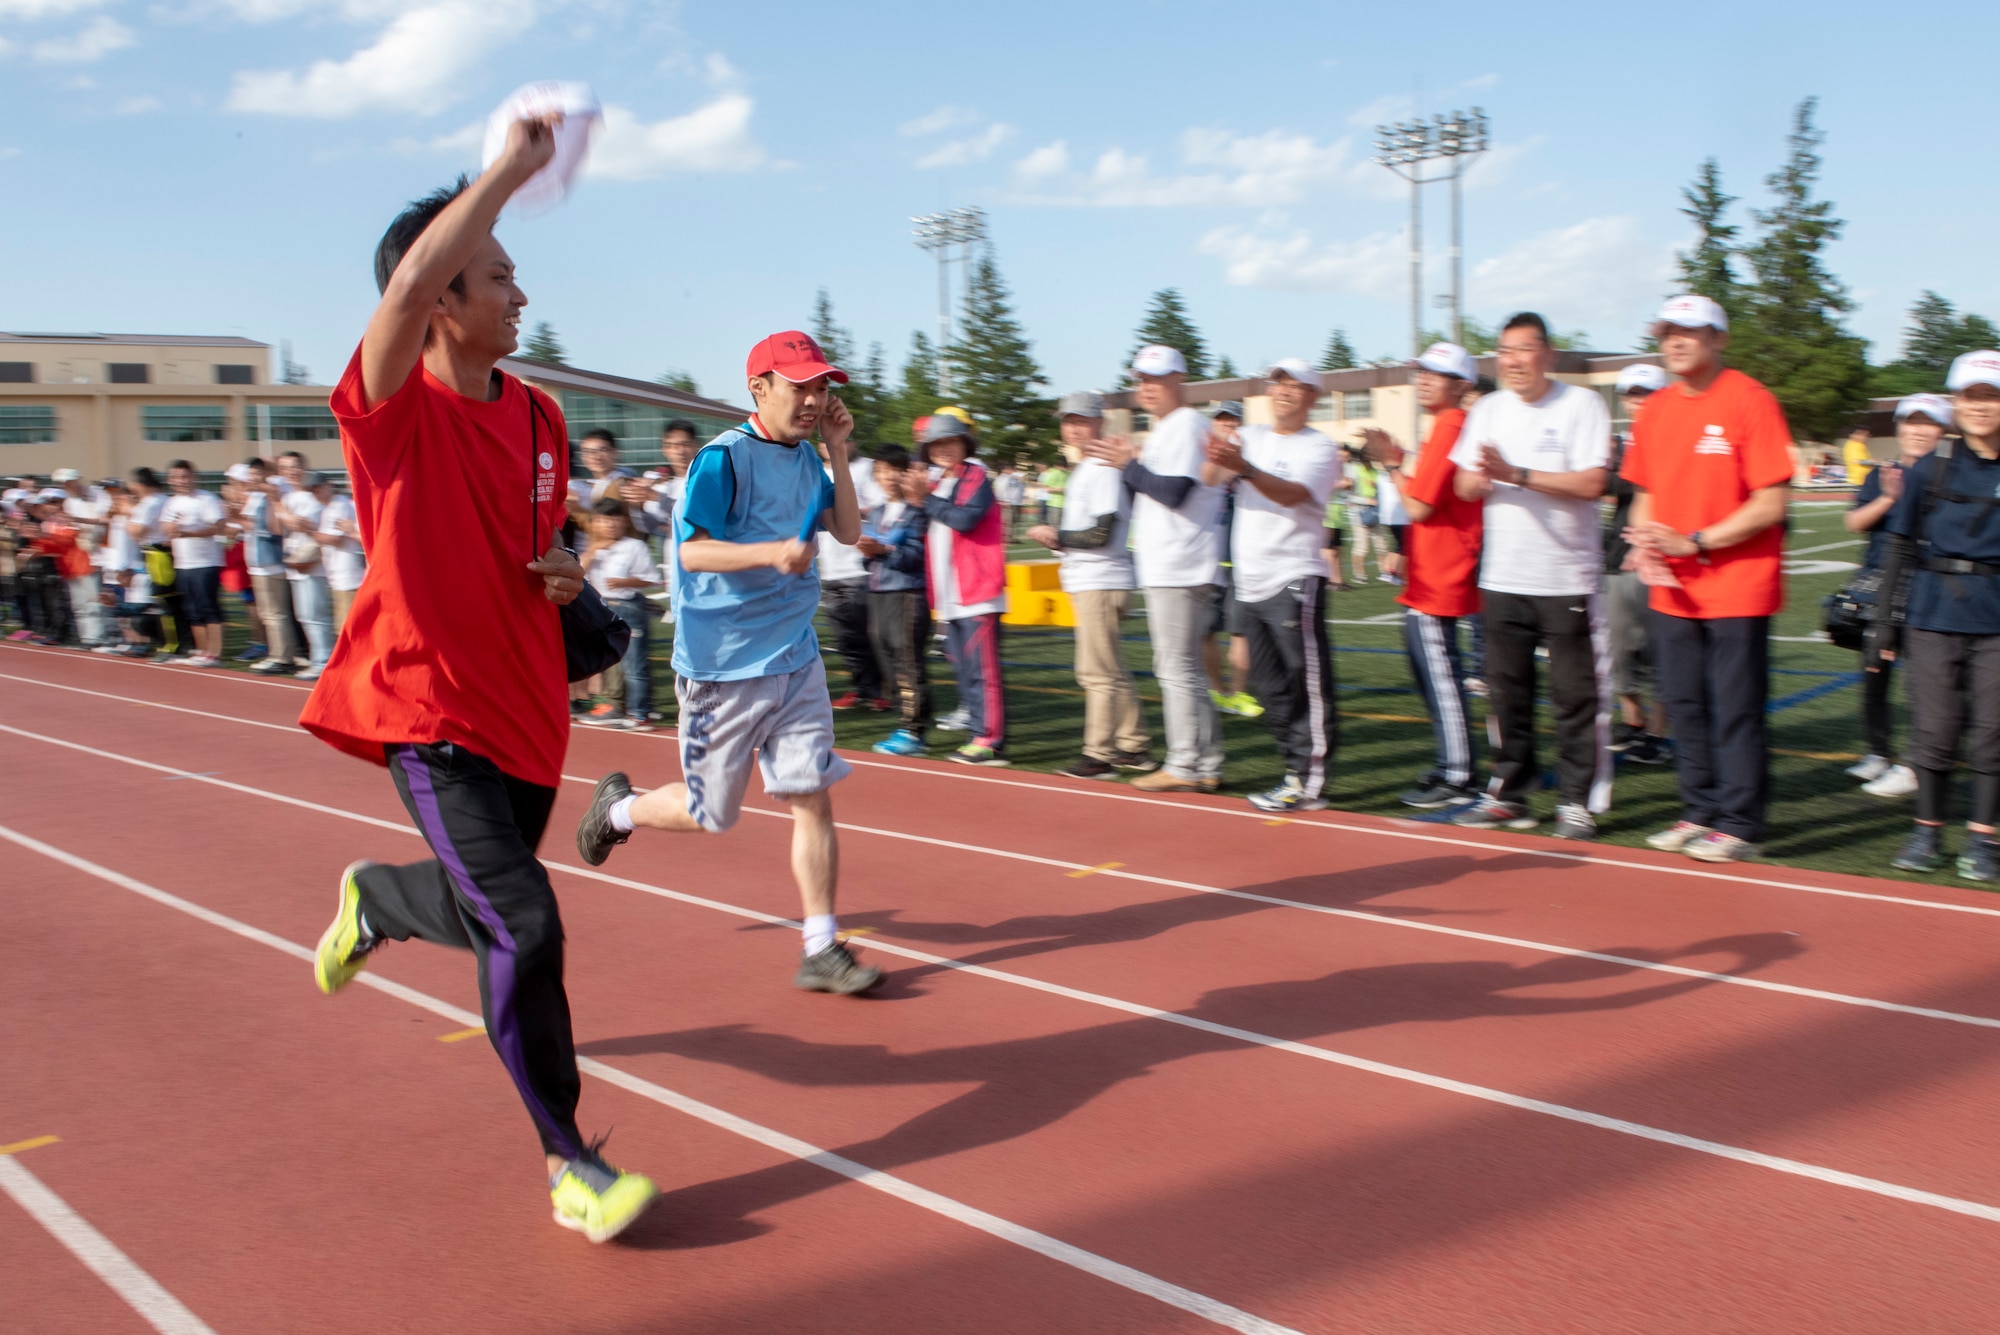 An athlete buddy sprints next to his athlete as the crowd cheers them on during the 4x100 meter relay race during the Kanto Plains Special Olympics at Yokota Air Base, Japan, May 19, 2018.